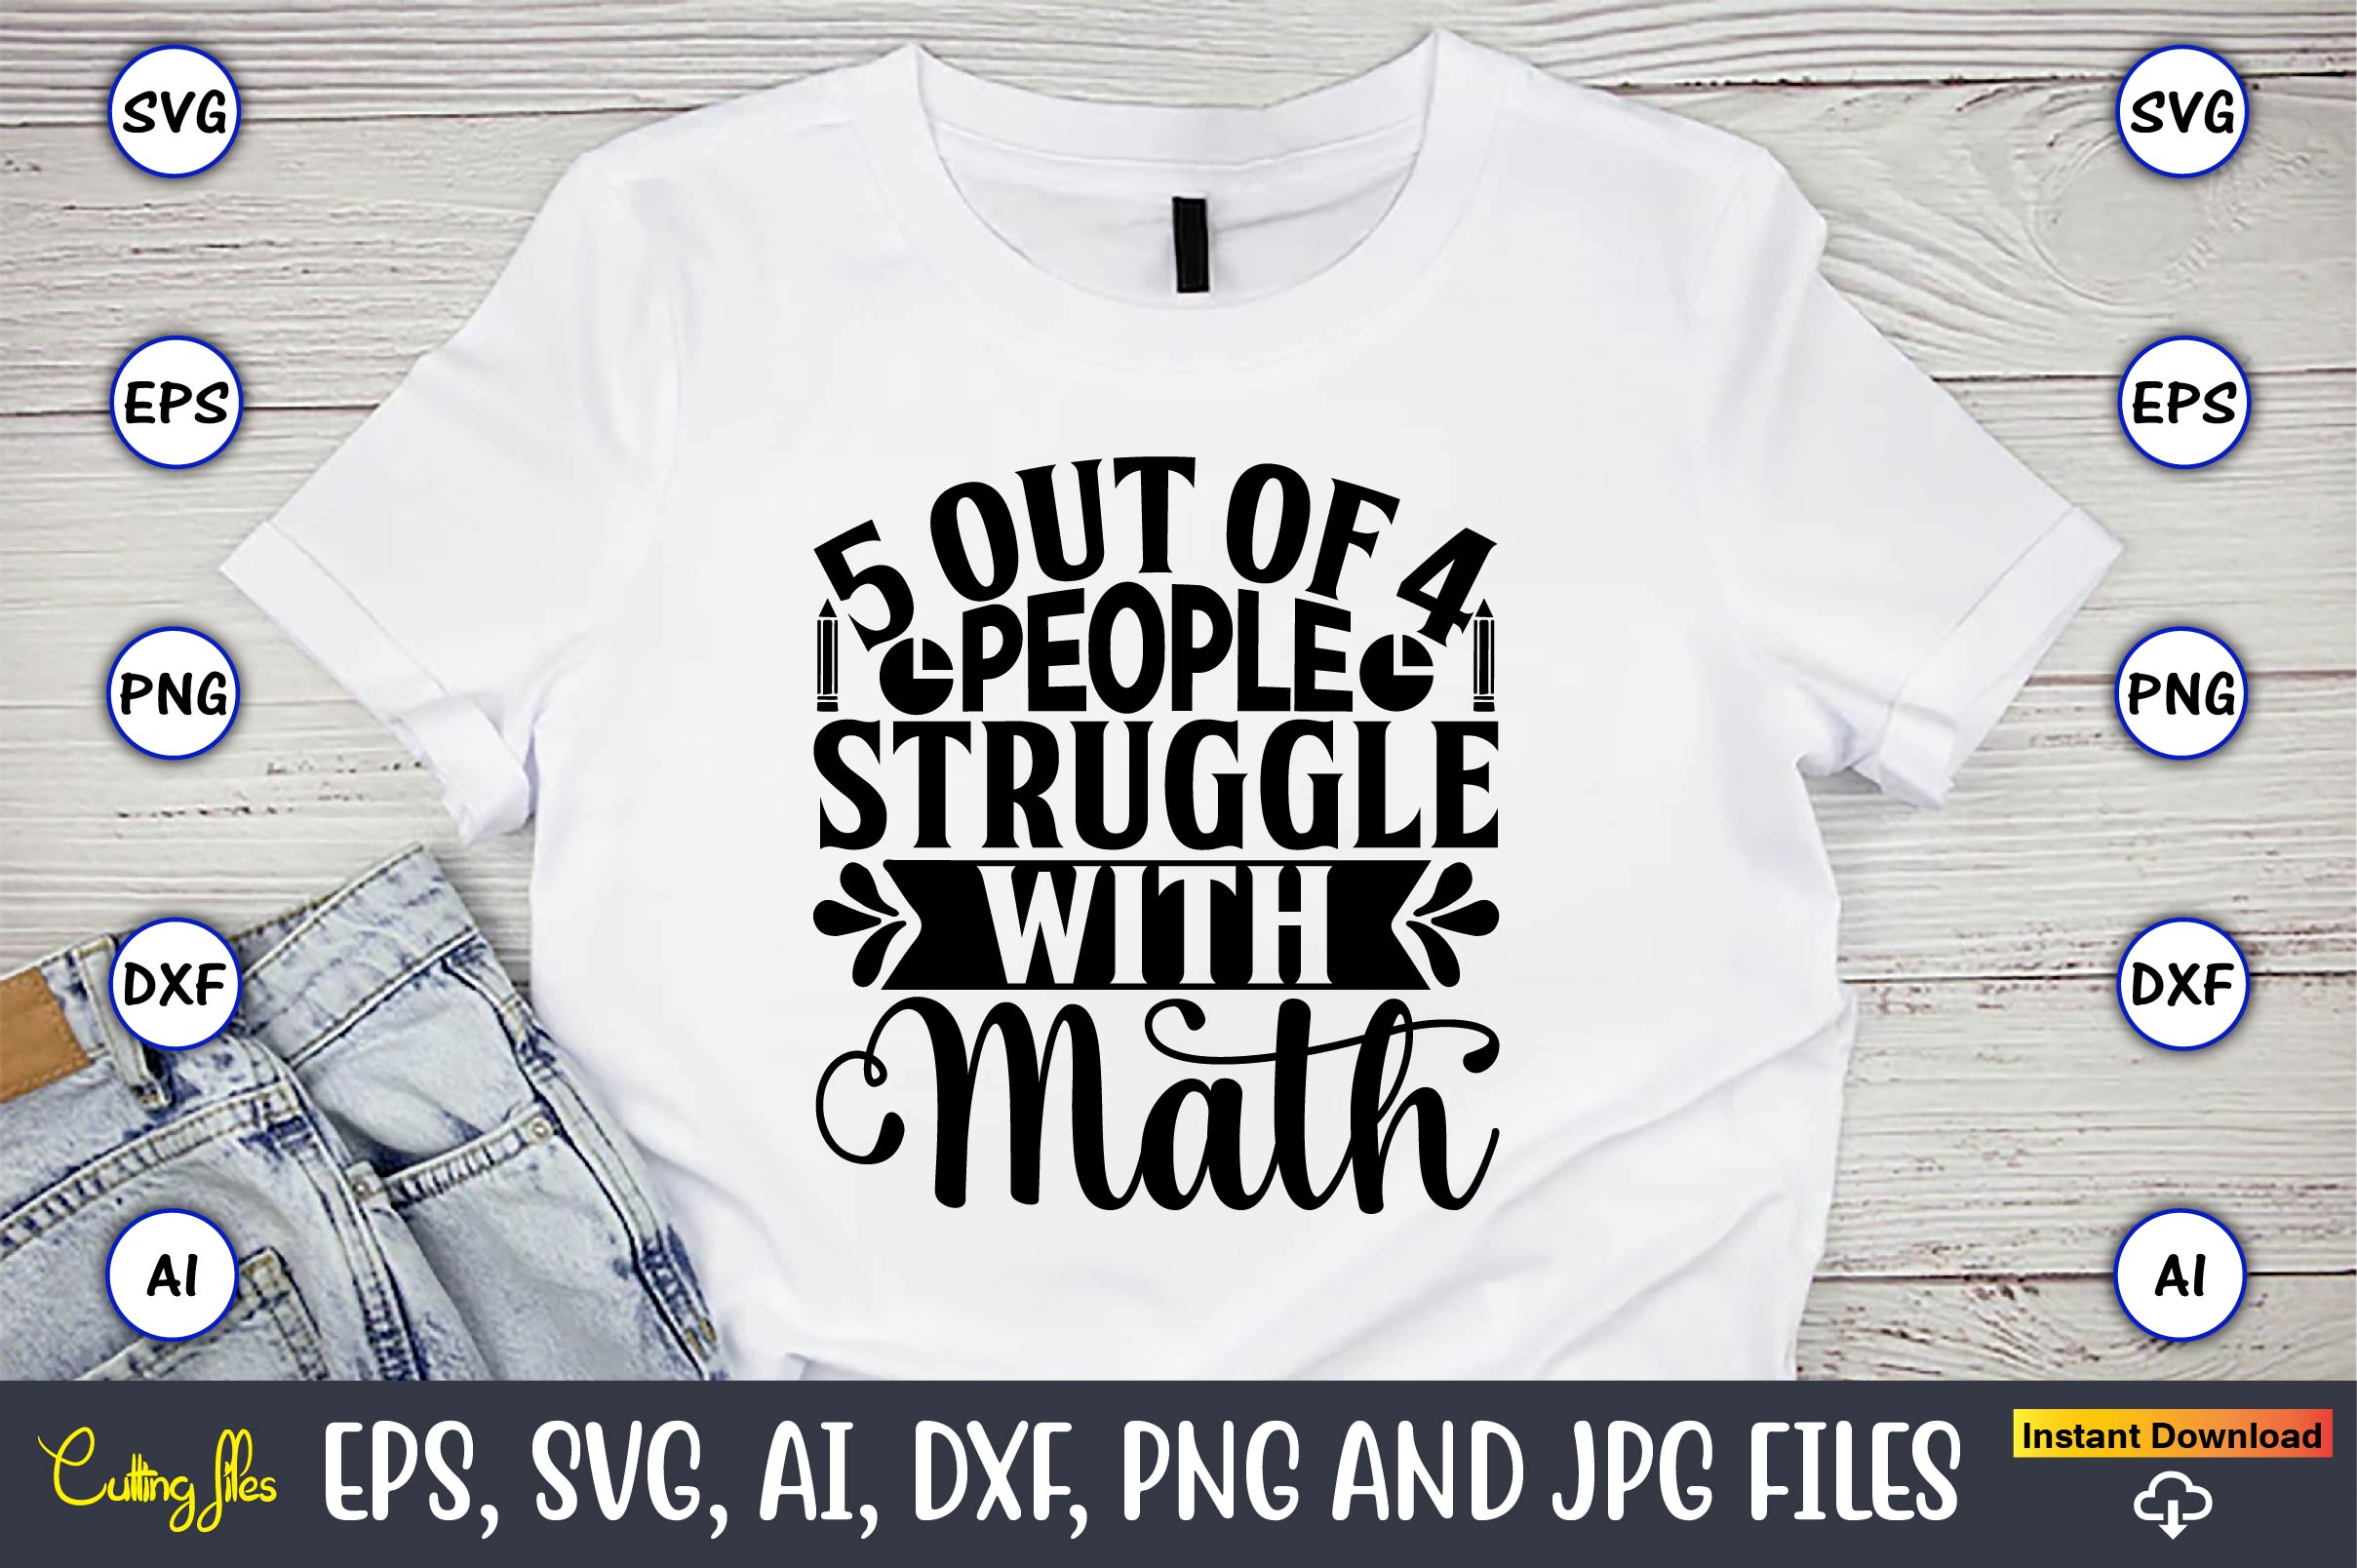 Image of a white t-shirt with irresistible inscription 5 out of 4 people struggle with math.